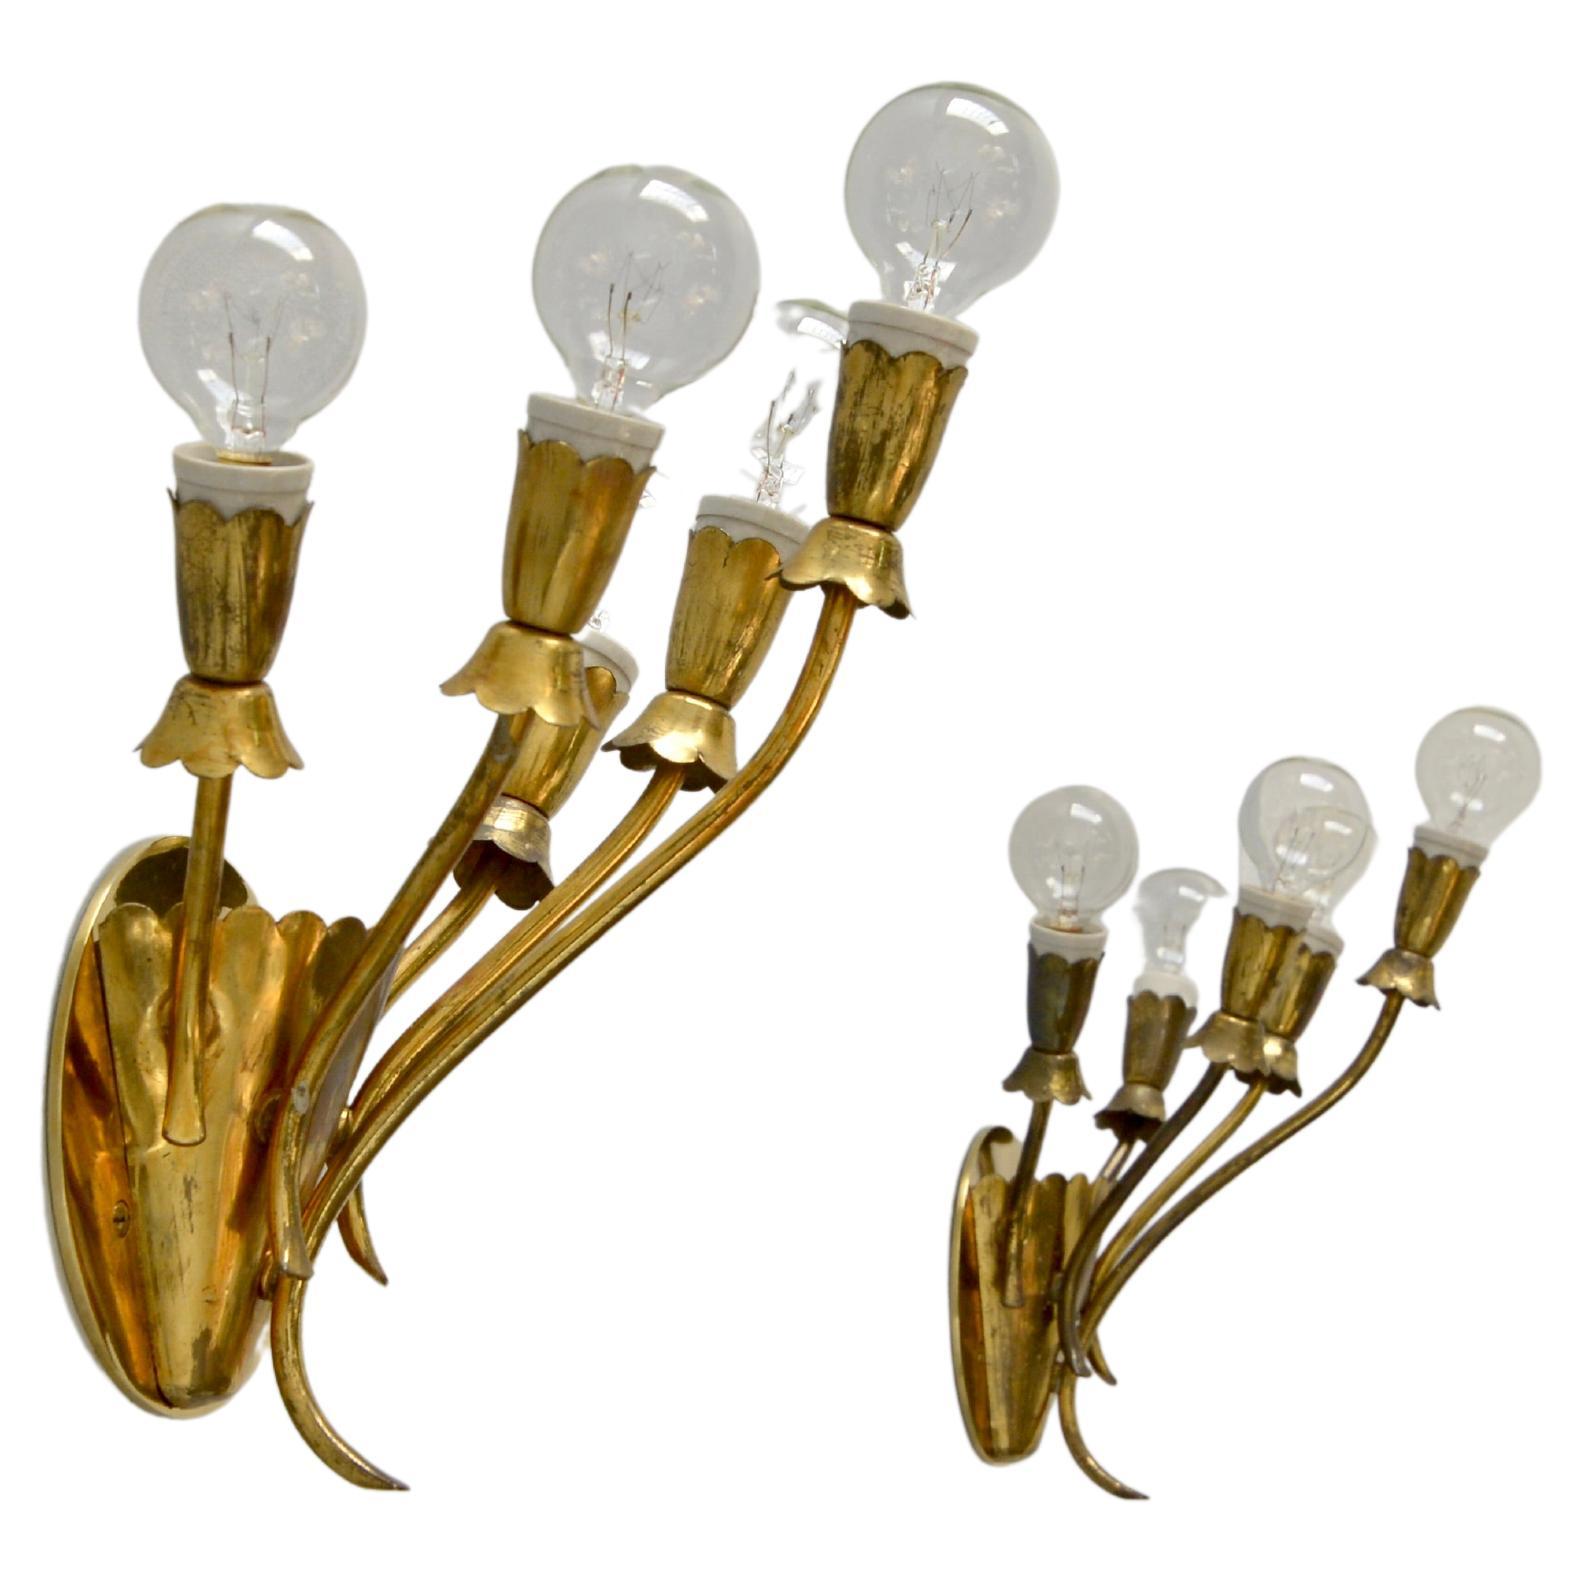 Single 5-Arm Botanical Sconce from 1940s Italy. This fully brass vintage sconce has a unique naturally aged brass finish. 5 E12 candelabra based sockets per sconce. Wired for use in the USA. It can also be wired for use anywhere in the world.